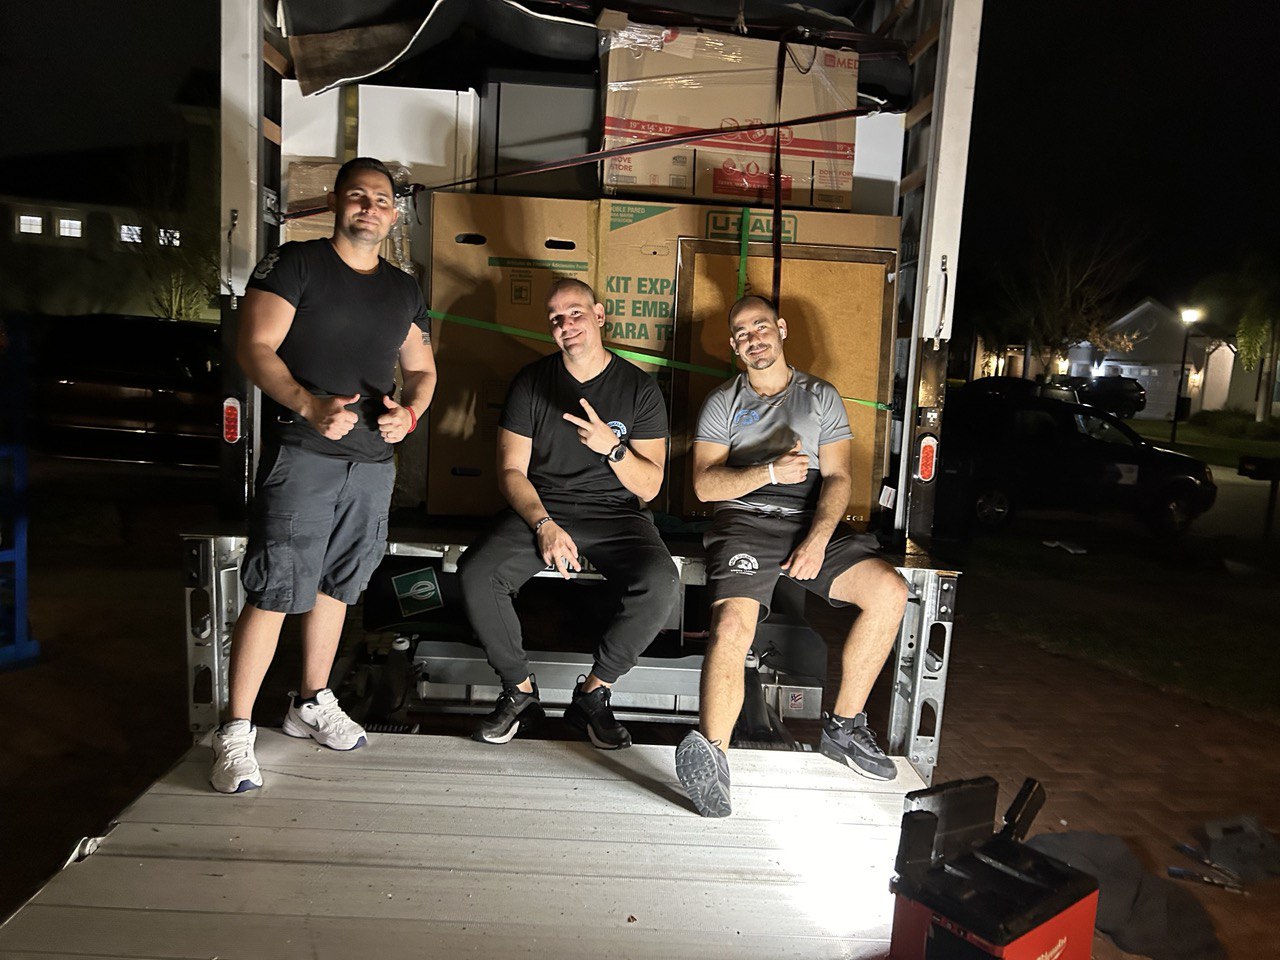 Best moving services in tampa